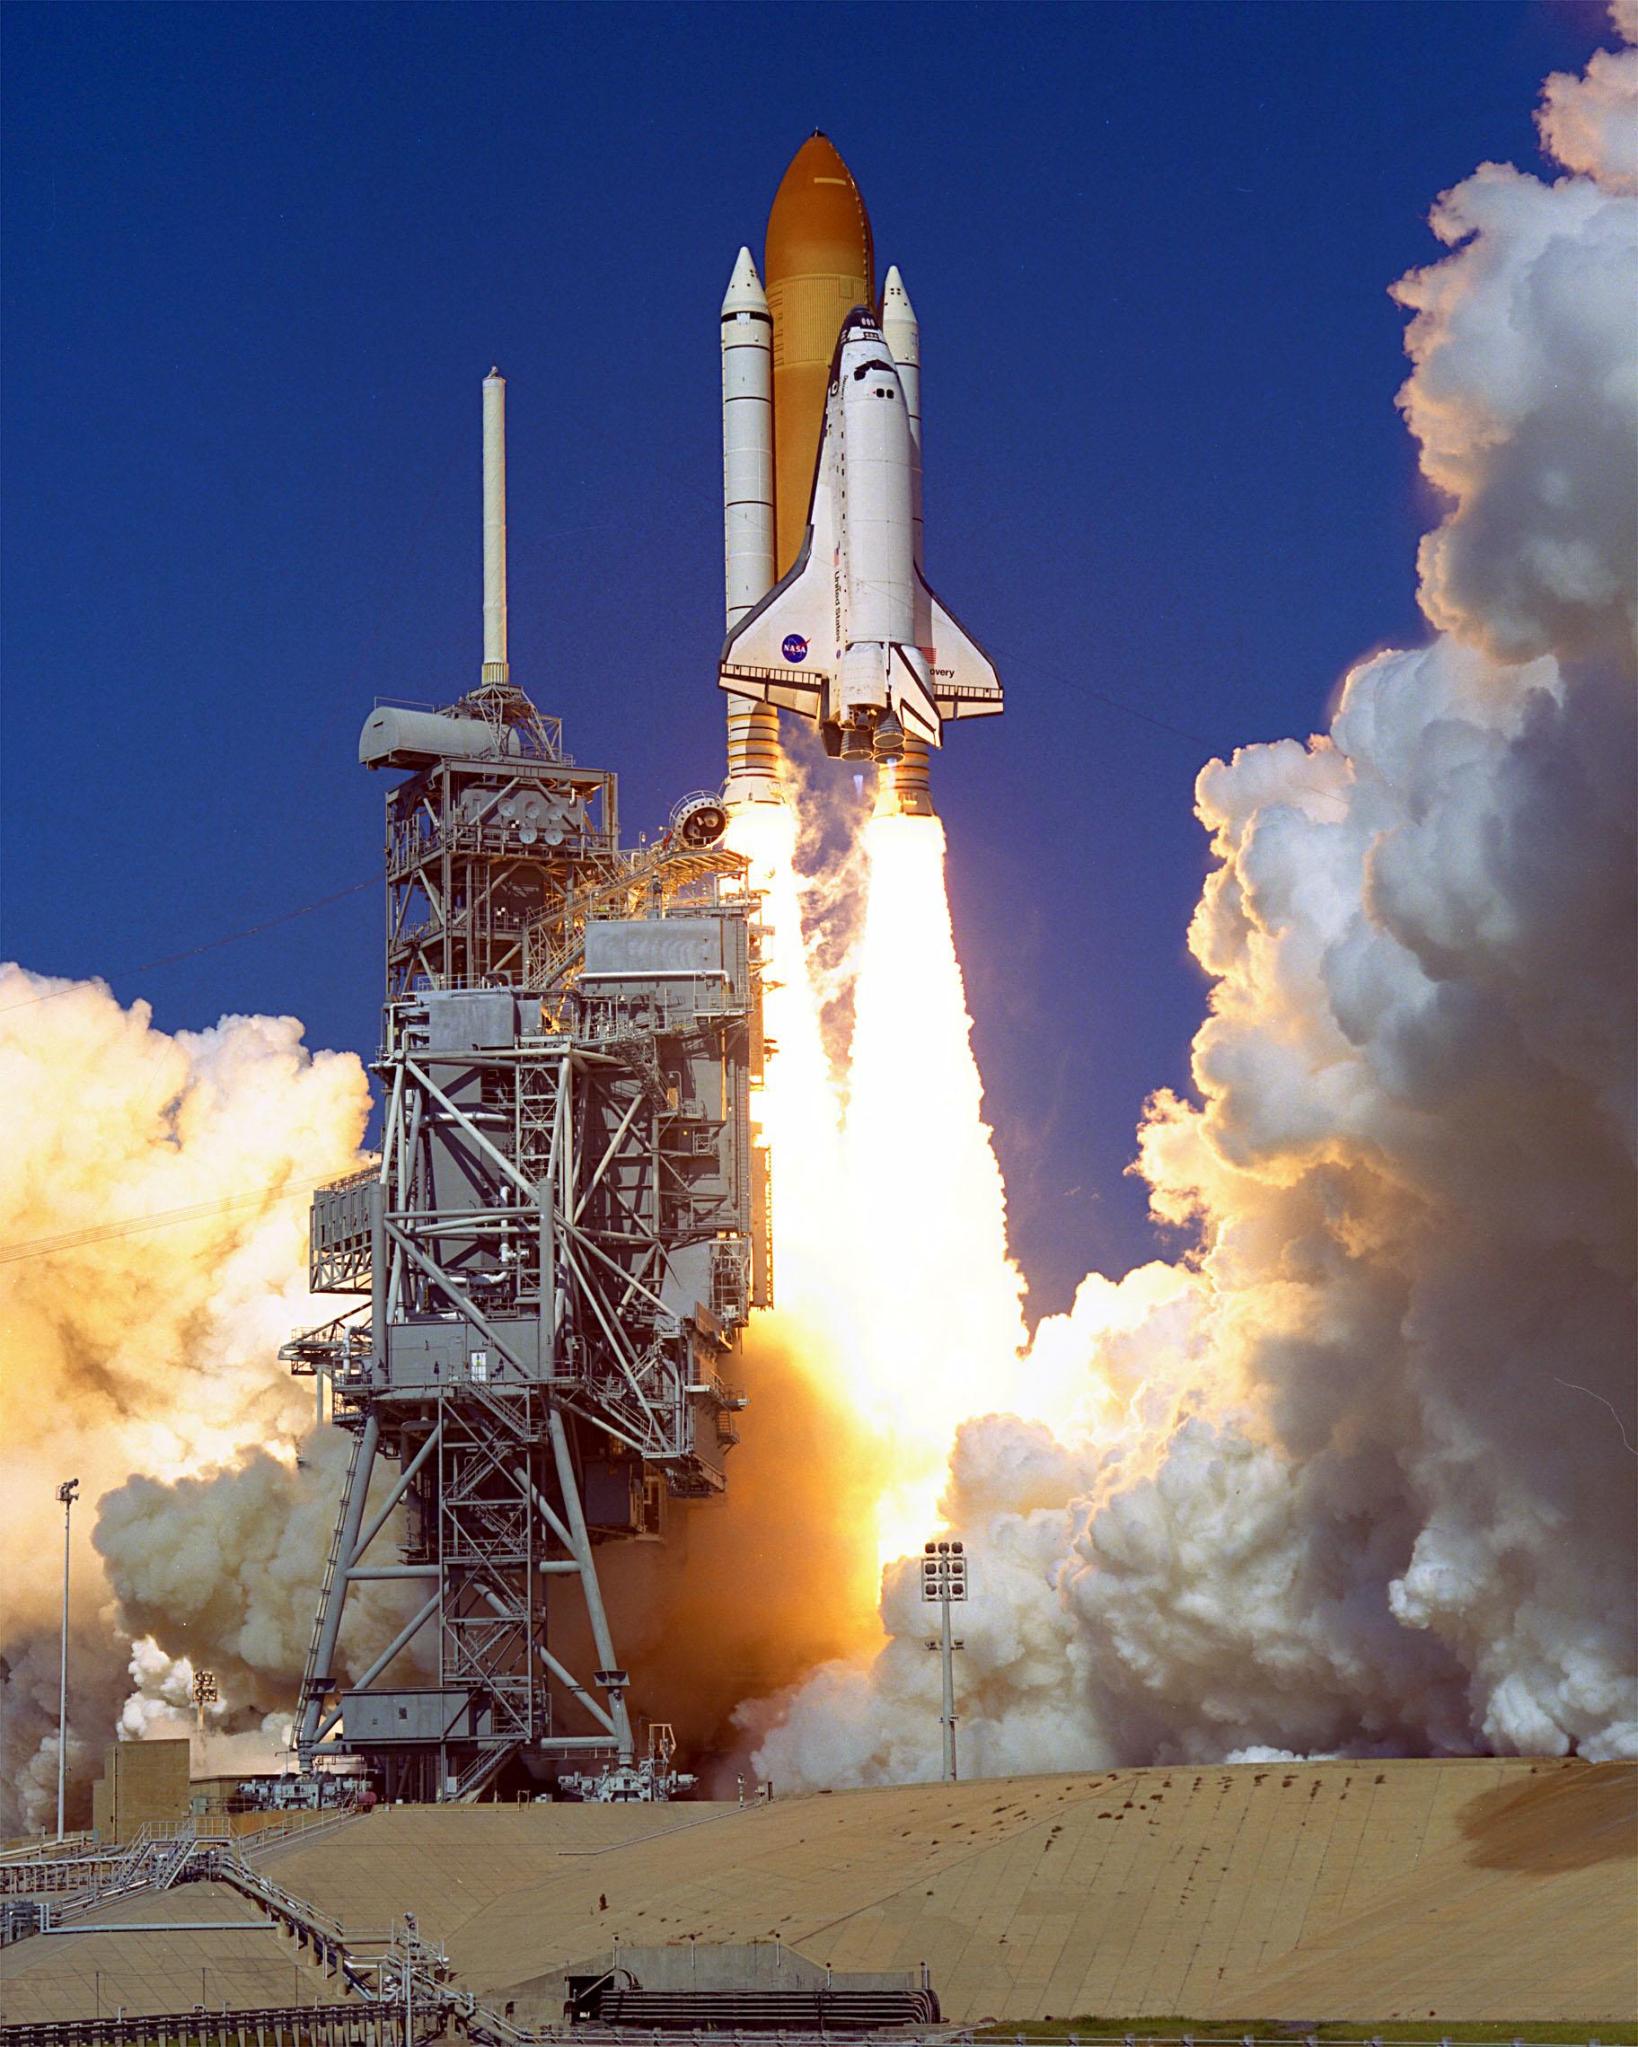 Space shuttle Discovery cleared Launch Pad 39B at 2:19 p.m. EST on Oct. 29, 1998, as it lifted off on mission STS-95. 